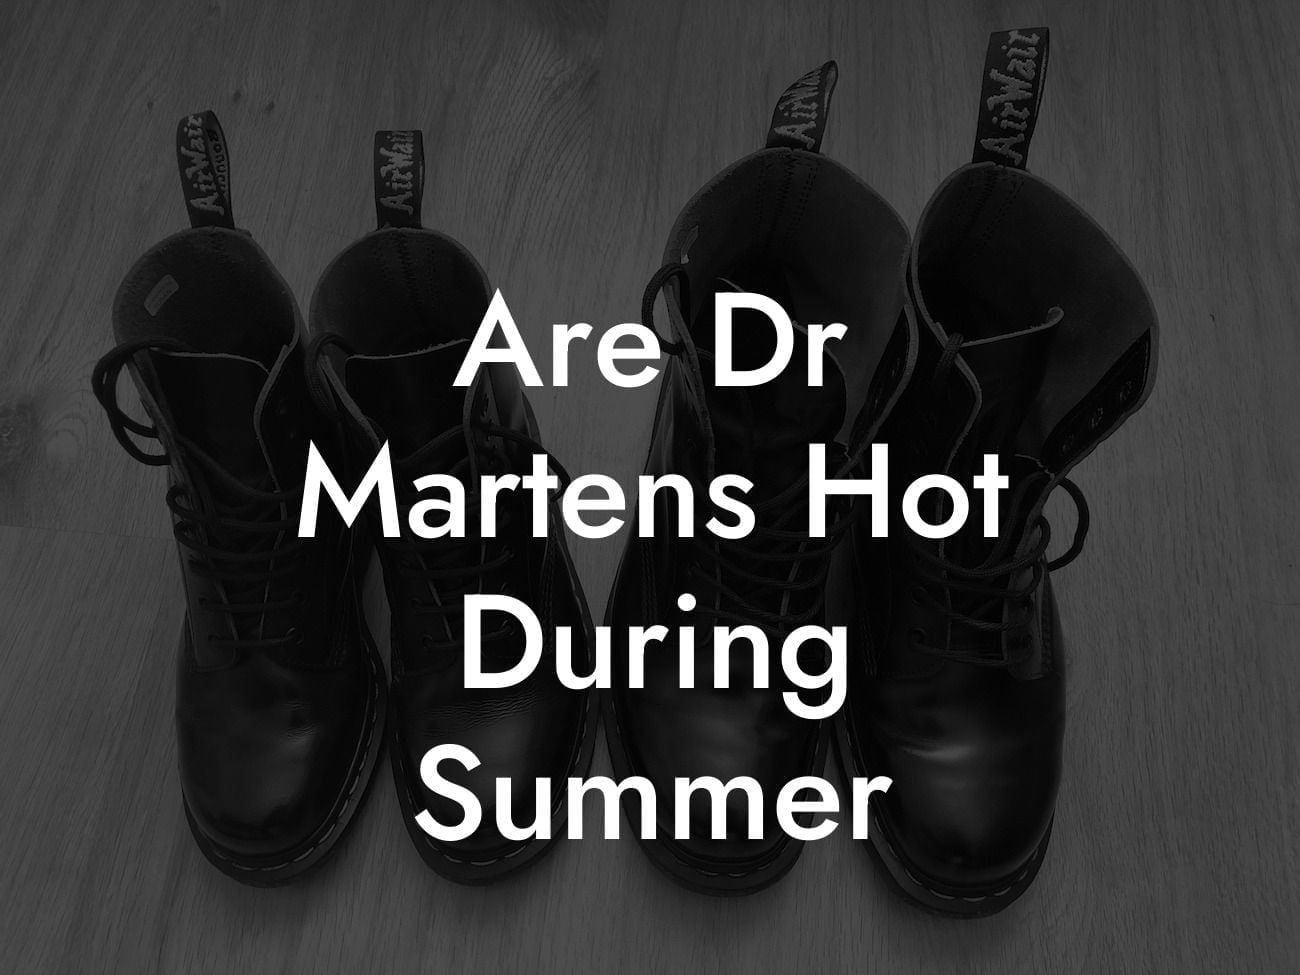 Are Dr Martens Hot During Summer